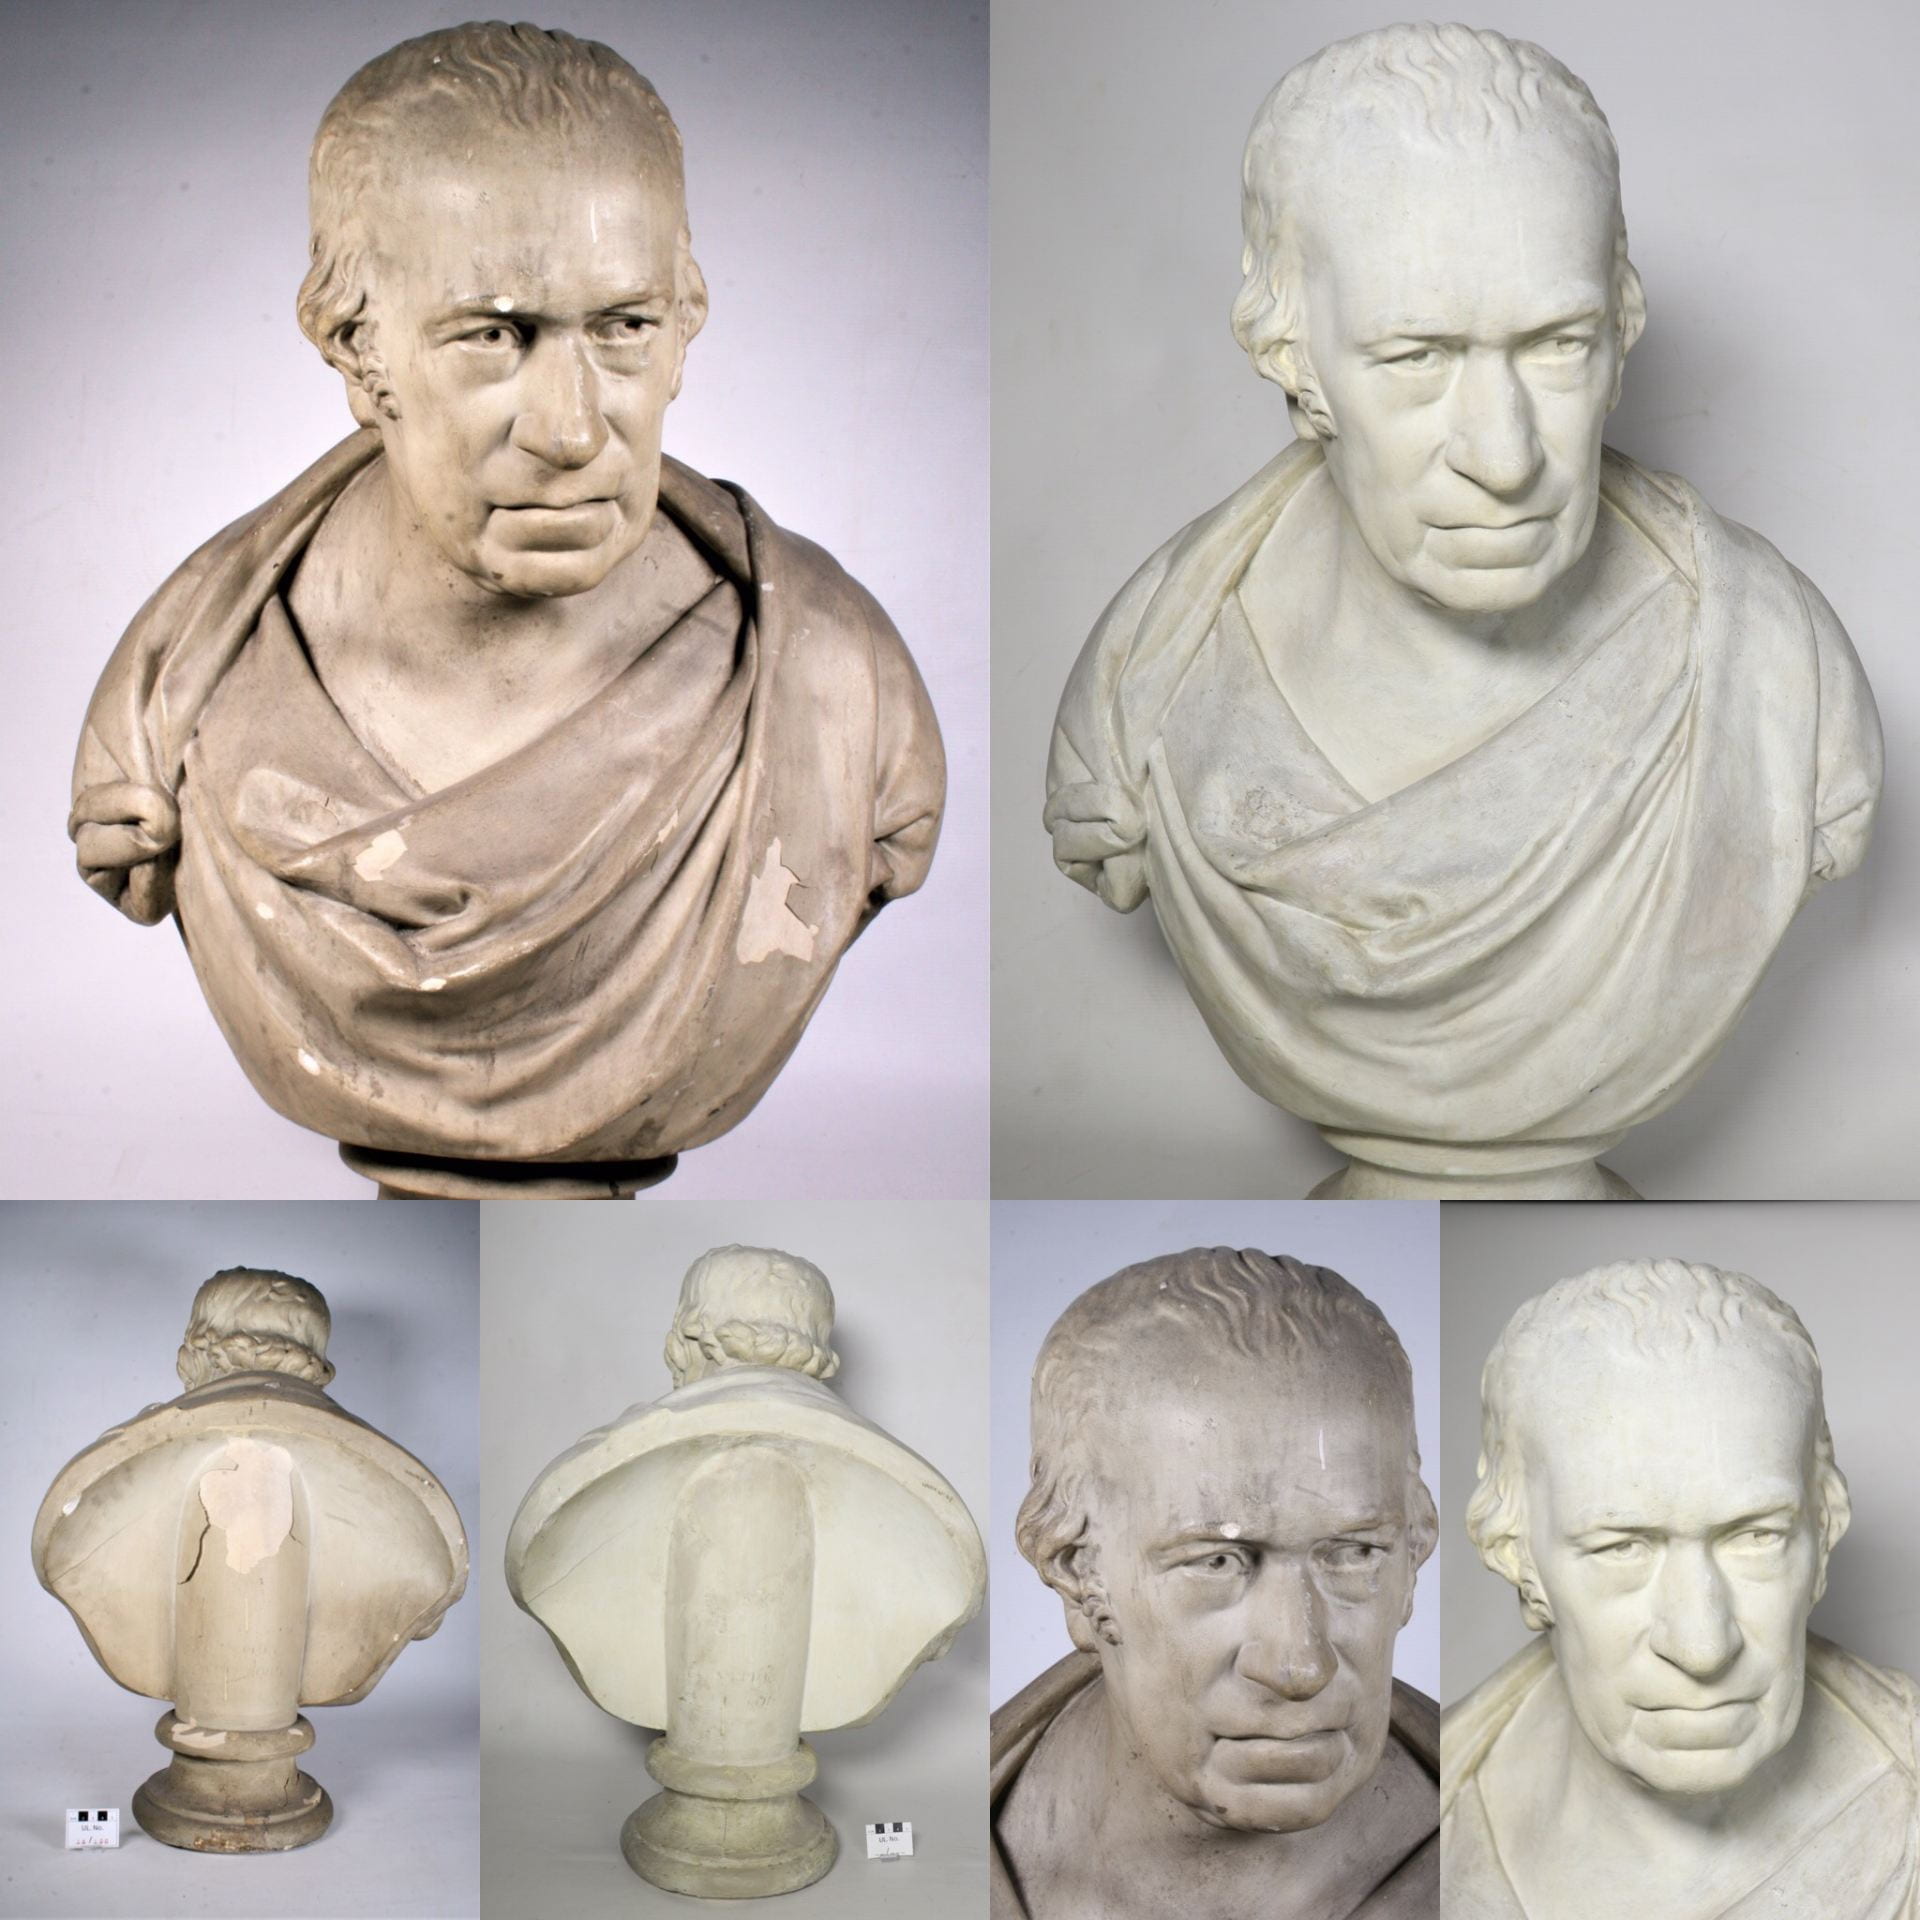 A chipped and dirty clay bust of inventor James Watt, and next to it, the same bust, but clean and with the chips filled-in.